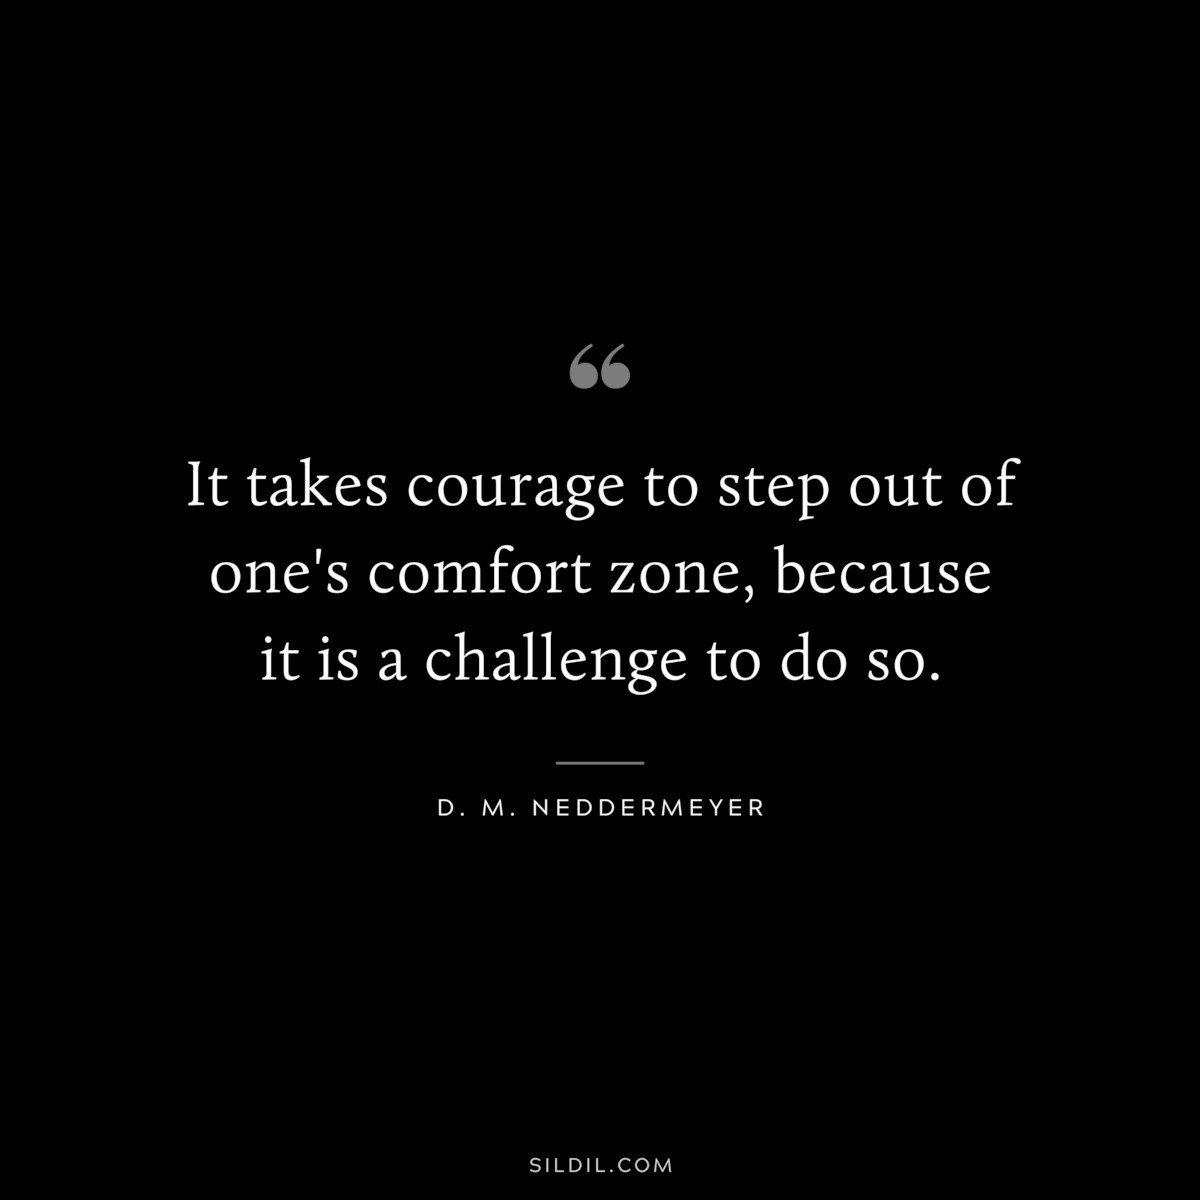 It takes courage to step out of one's comfort zone, because it is a challenge to do so. ― D. M. Neddermeyer